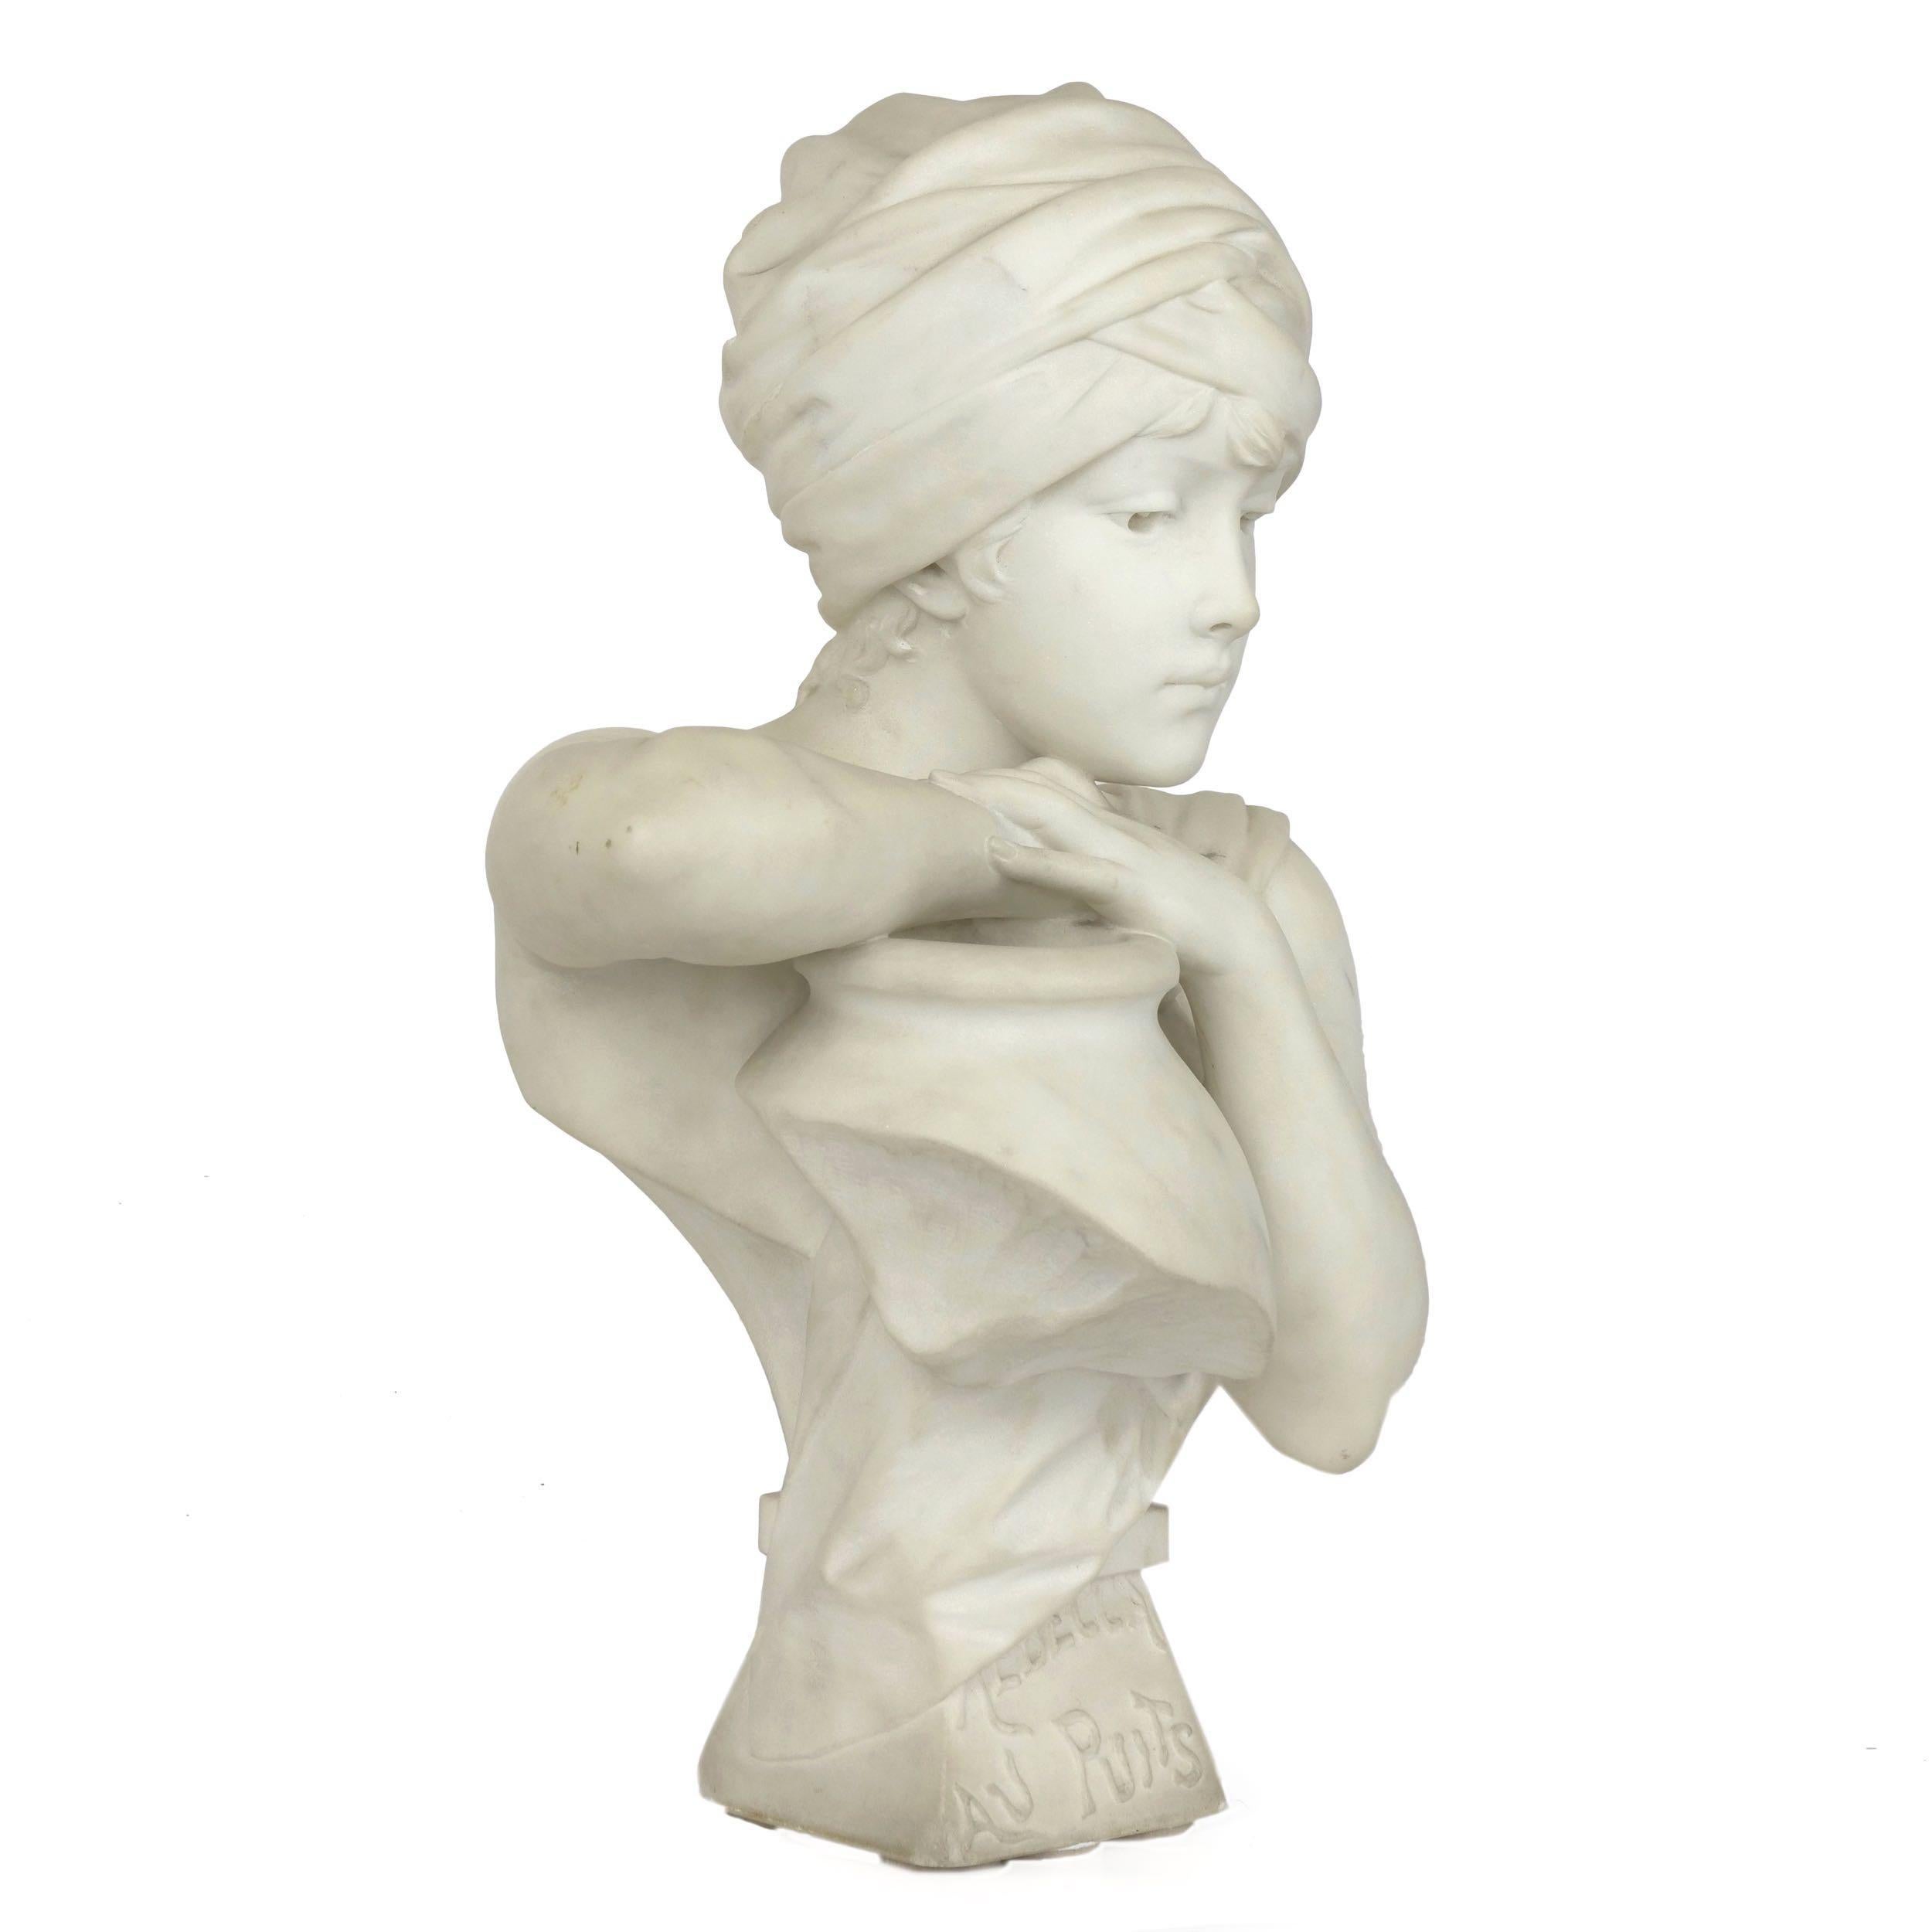 A talented sculptor of both the neoclassical and also the Art Nouveau styles, the work of Antonio Piazza is almost without exception moving, whimsical and intriguing in his presentation of the human form. His work is held in the Musée de Montpelier